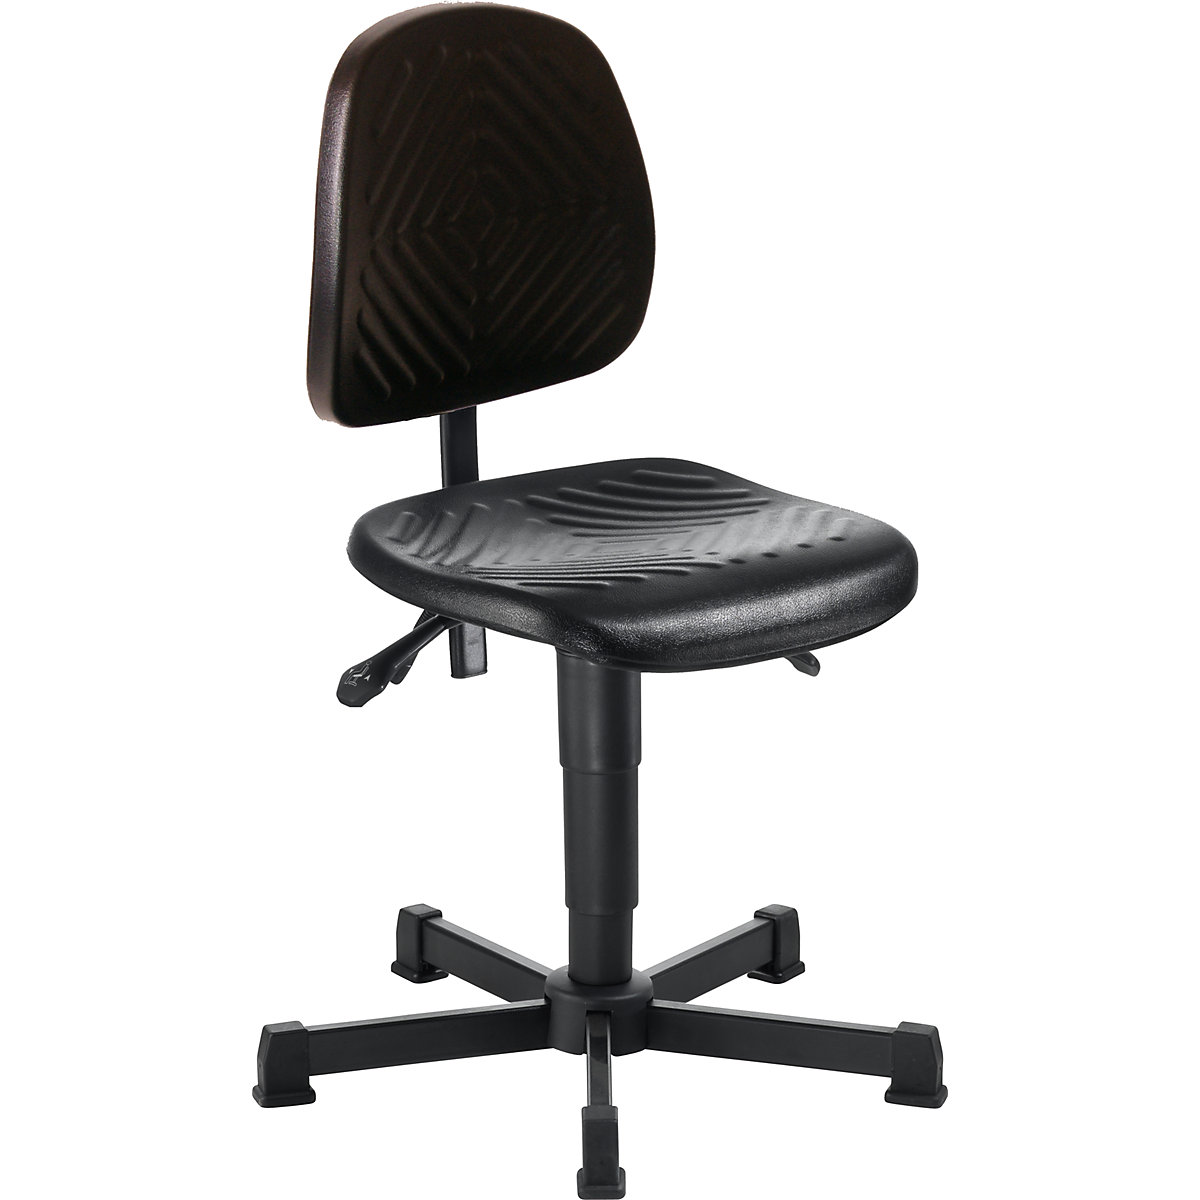 Industrial swivel chair, polyurethane upholstery, gas lift height adjustment - meychair